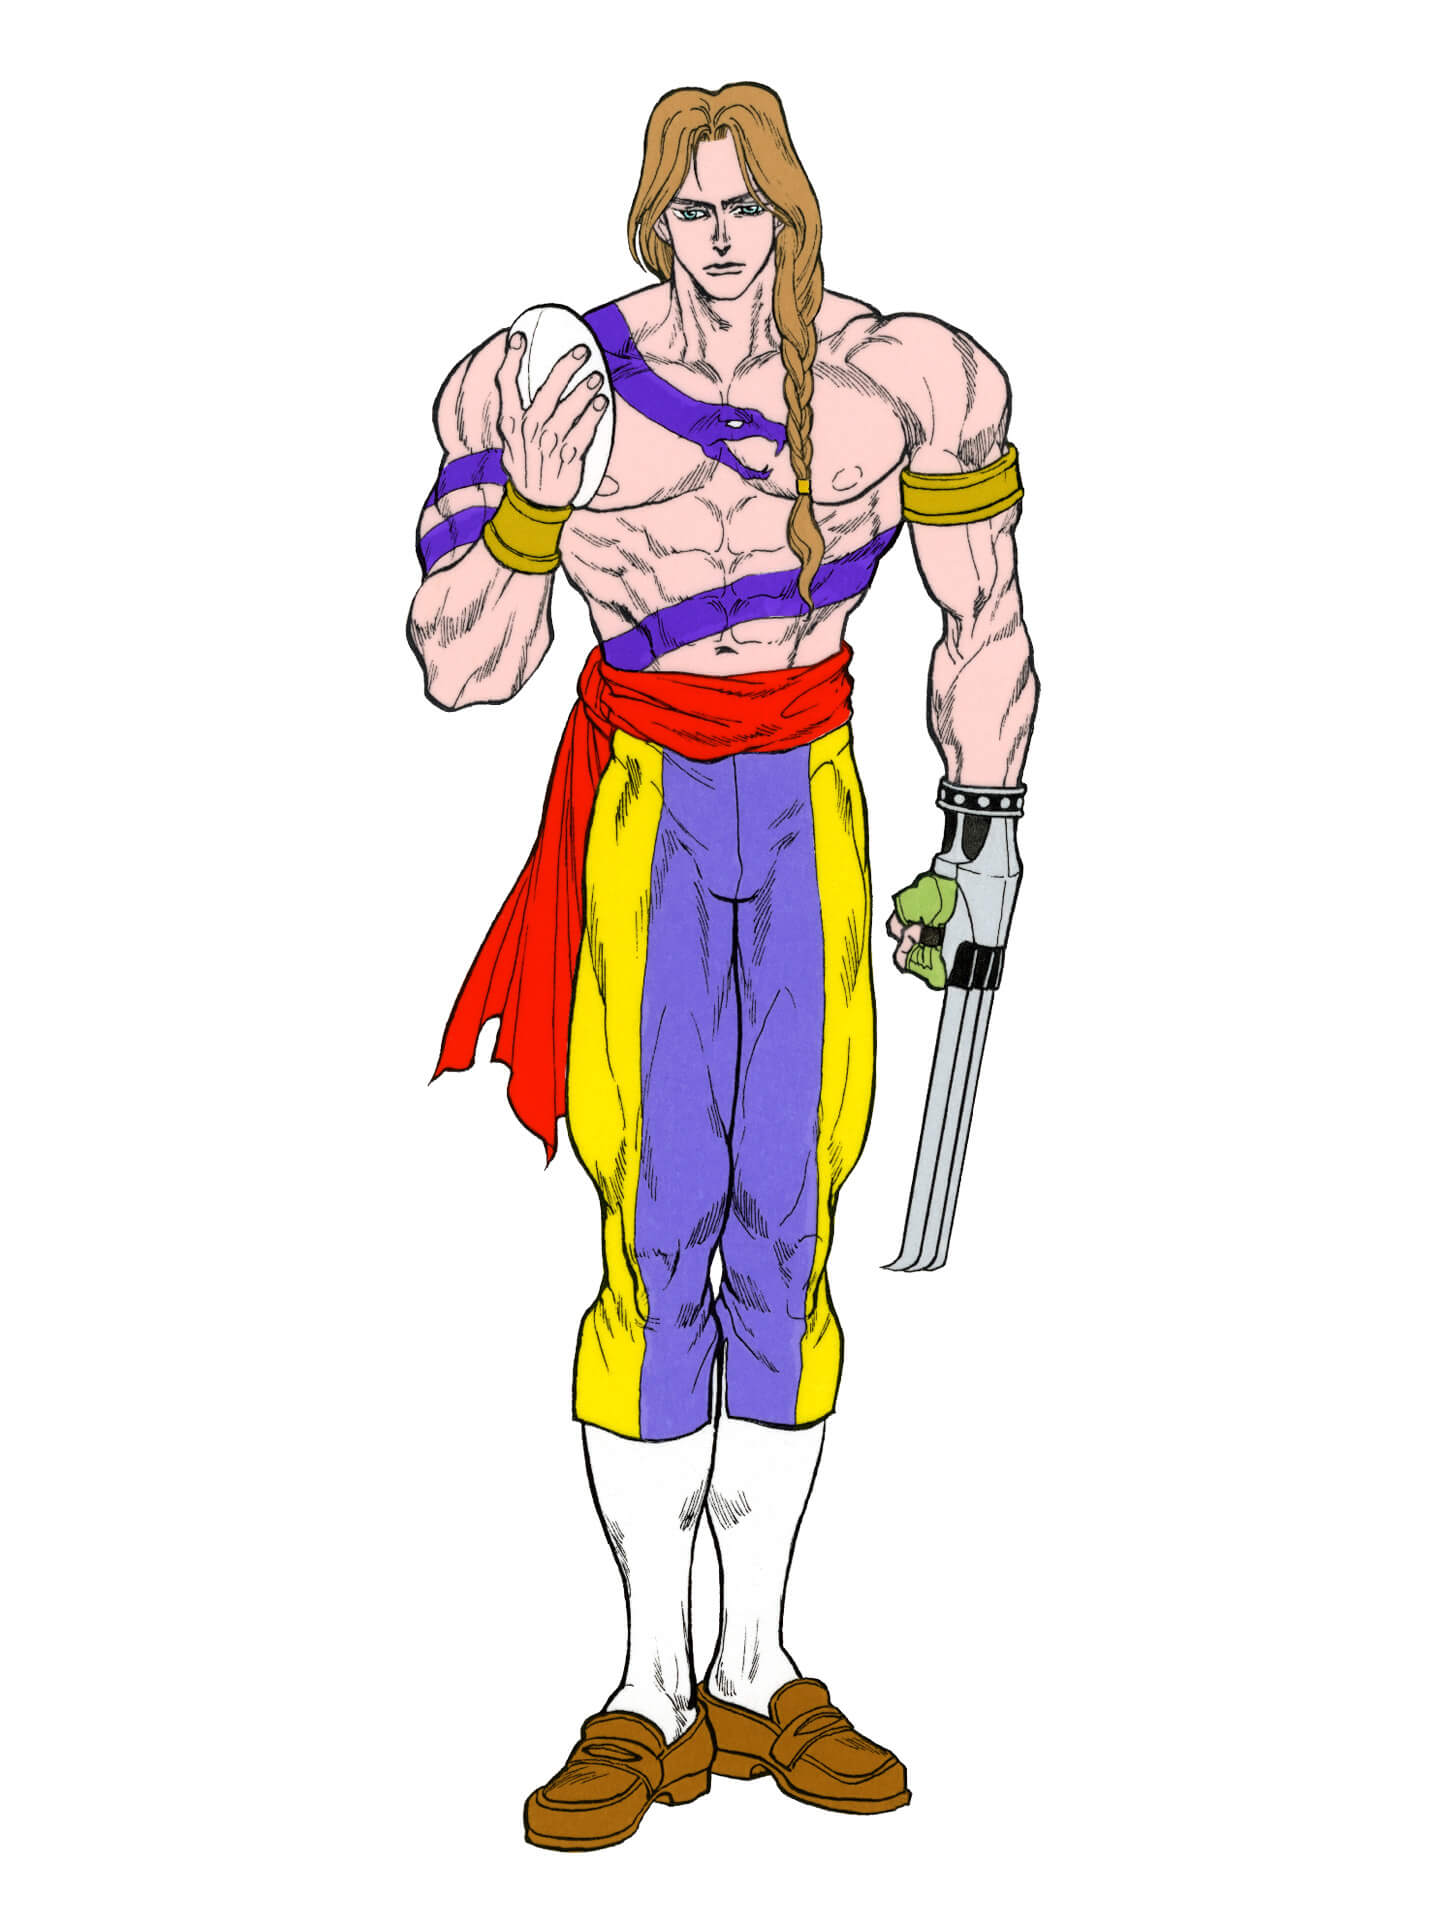 Vega Character Images, Images, Street Fighter II, Museum, street 